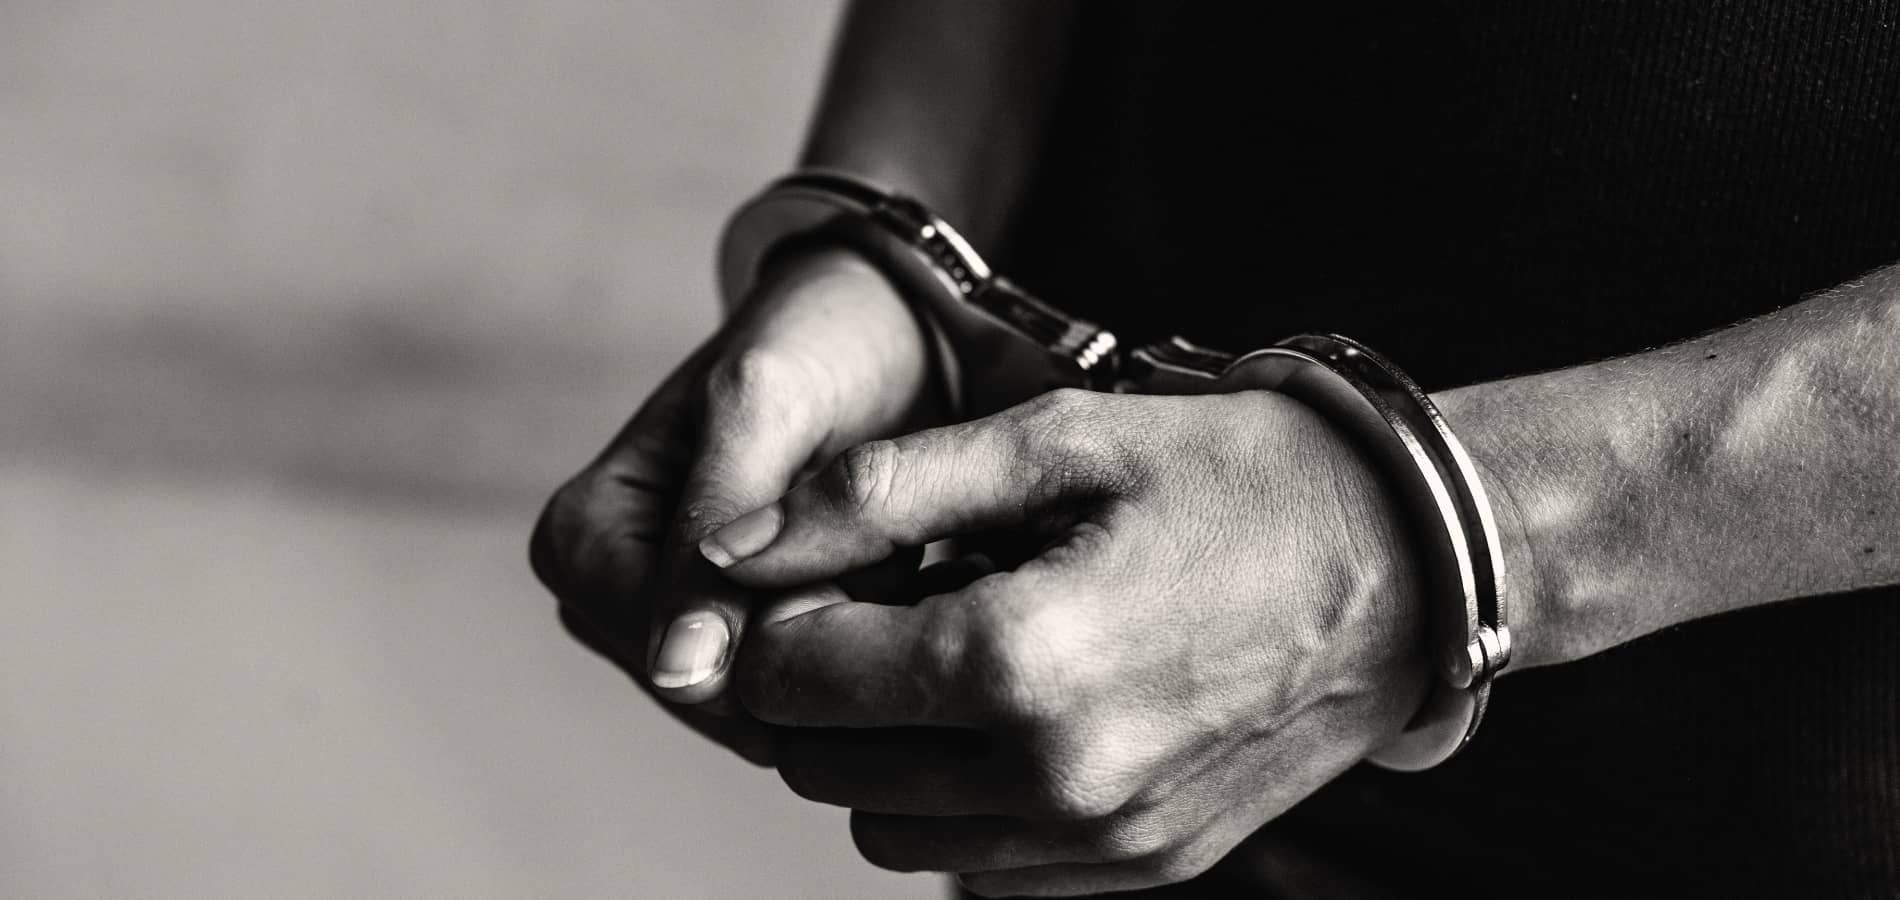 image of a person's hands in handcuffs